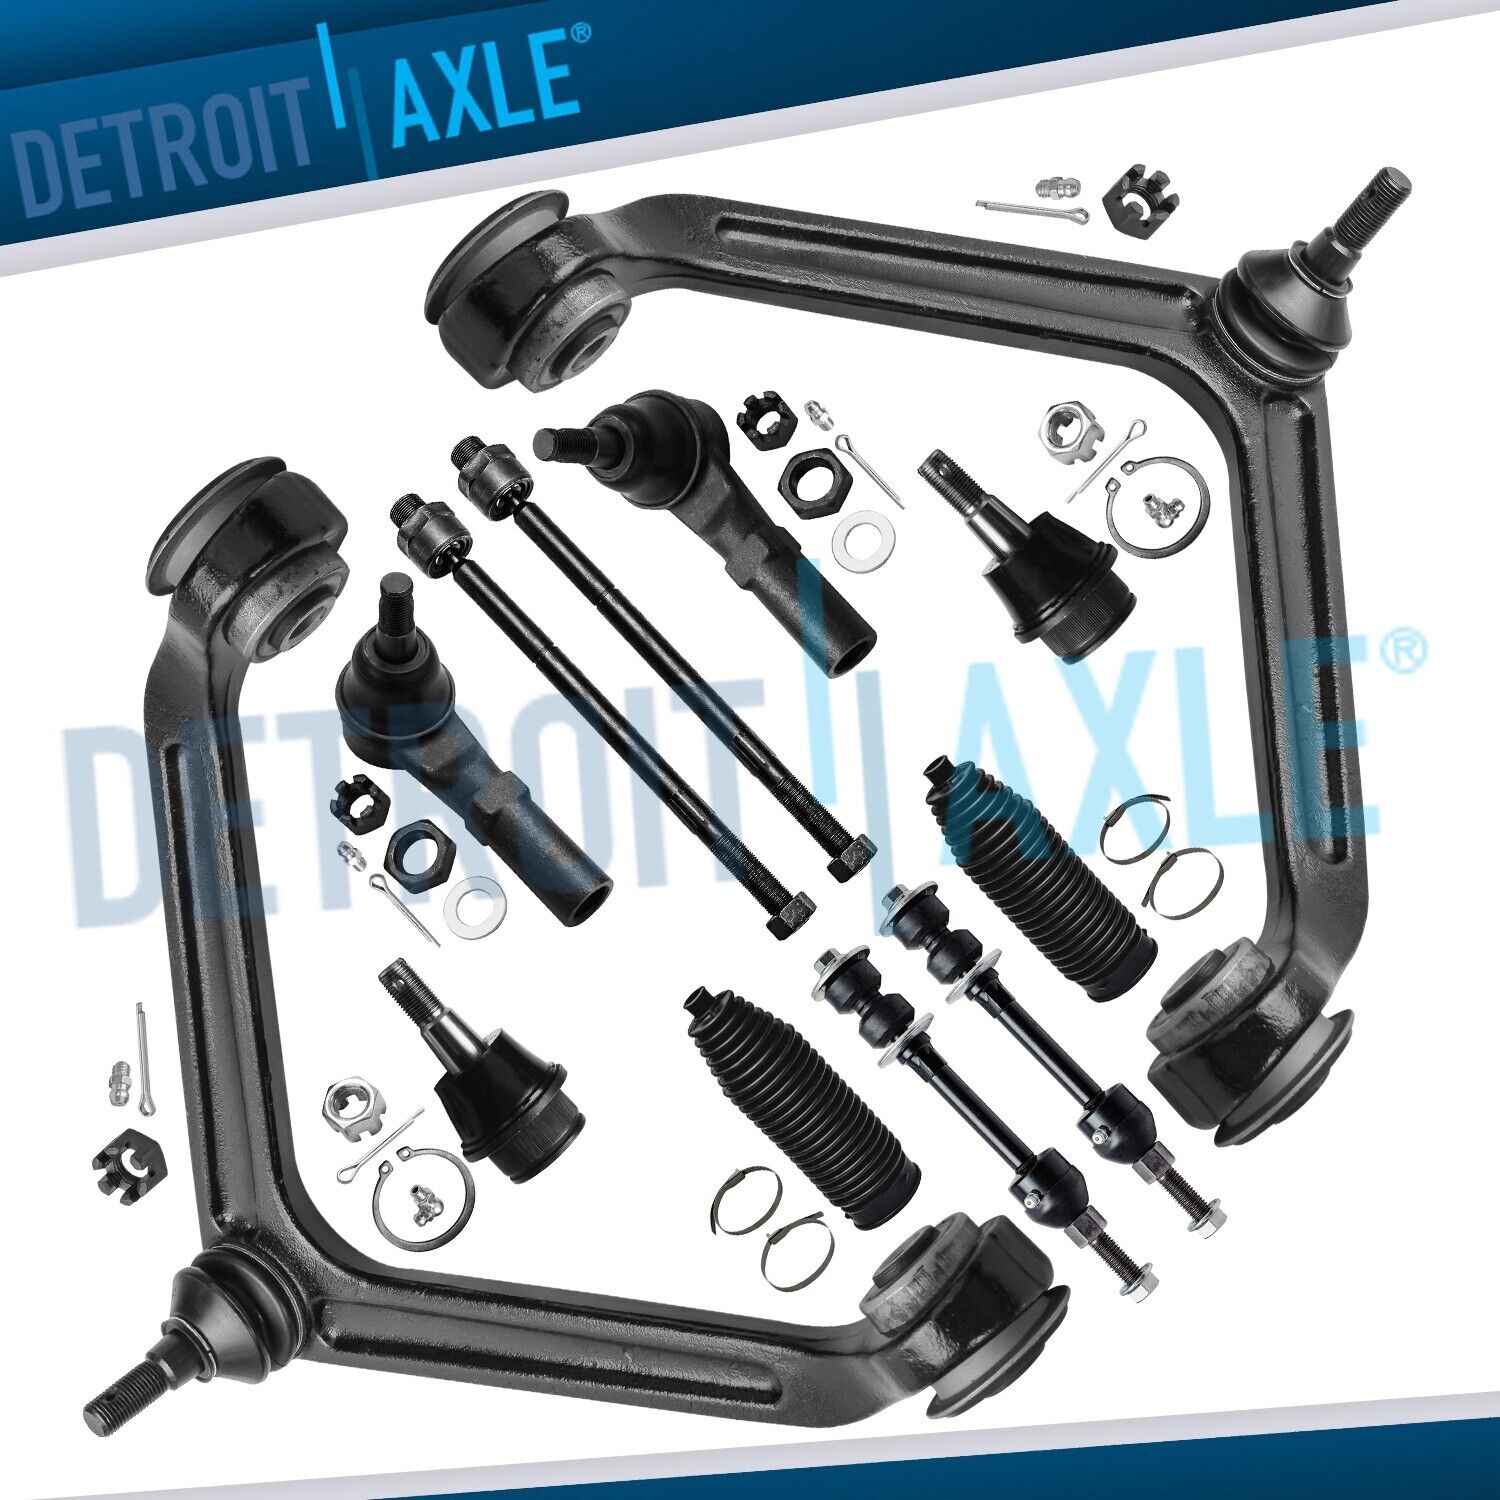 2WD Front Upper Control Arms Tie Rods Suspension Kit for Dodge 2002-05 Ram 1500